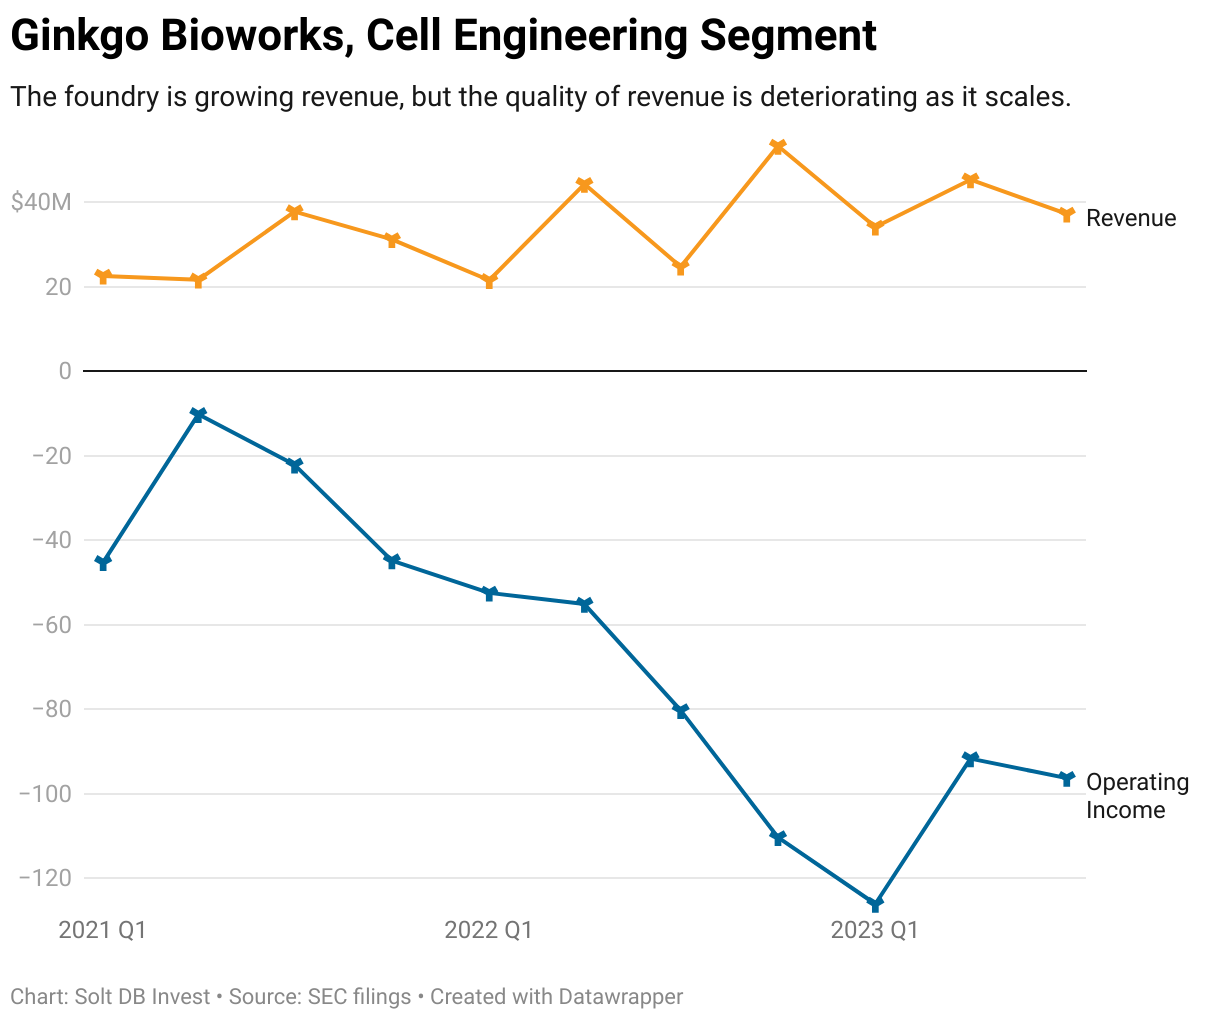 A chart showing the quarterly revenue and operating income of the Cell Engineering segment of Ginkgo Bioworks from the first quarter of 2021 through the third quarter of 2023.